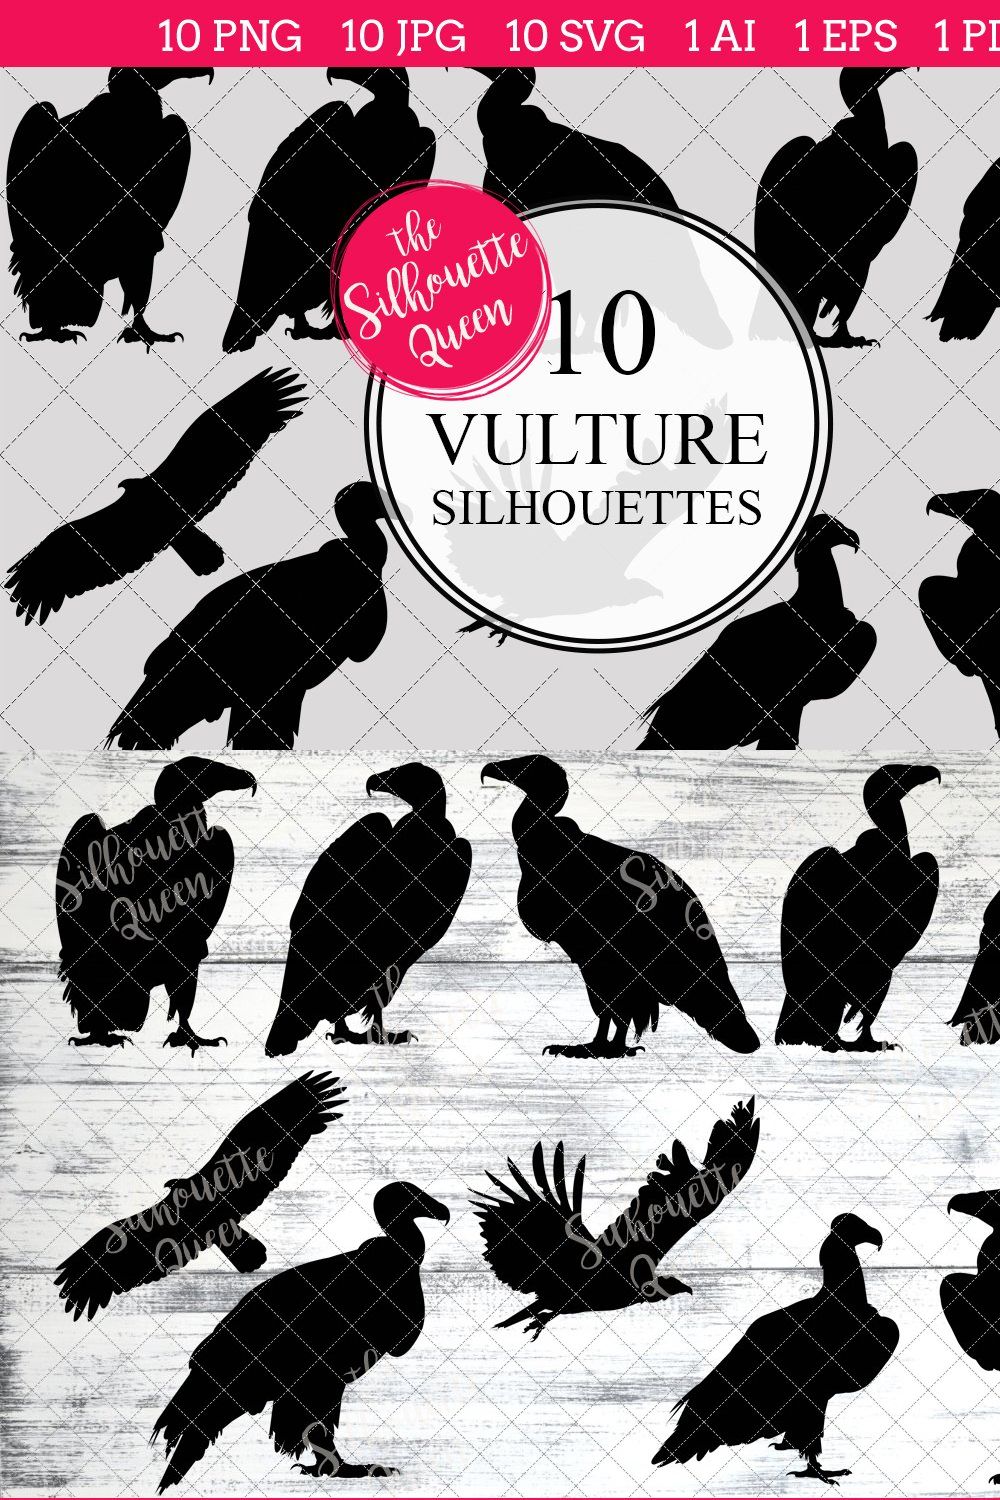 Vulture silhouette vector graphics pinterest preview image.